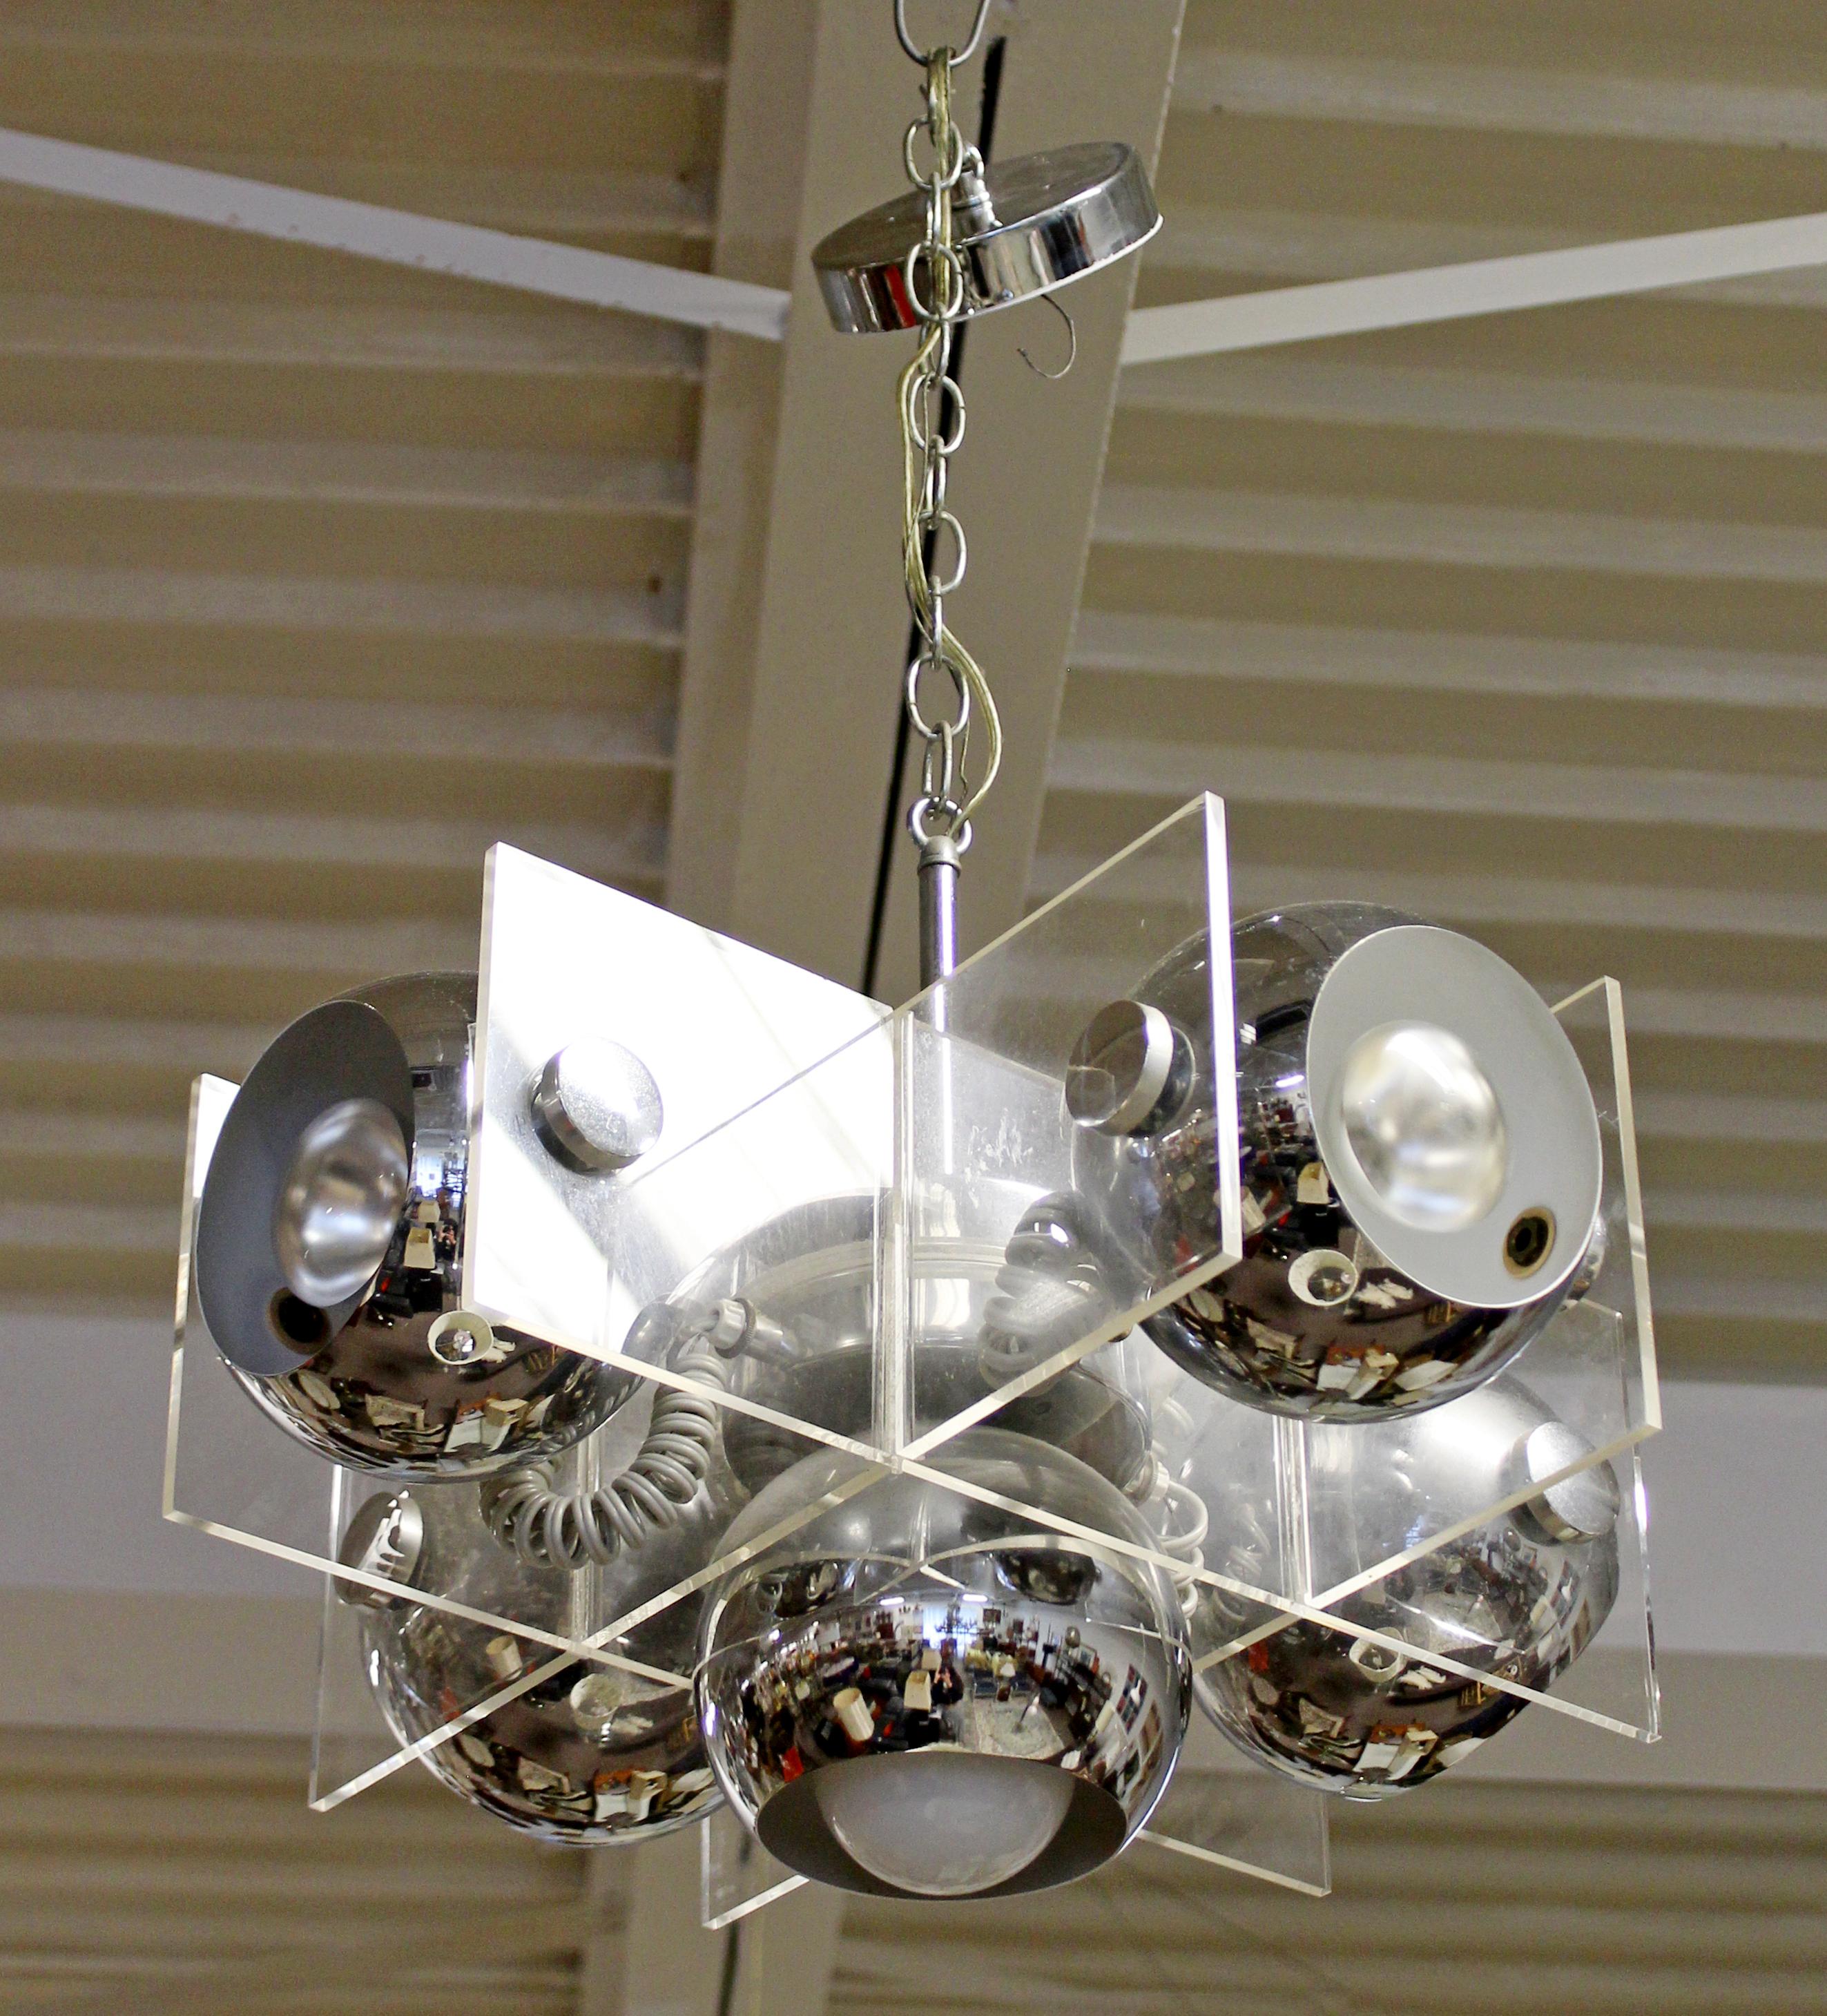 For your consideration is a funky, cubic chandelier, made of chrome and Lucite, circa 1970s. In excellent vintage condition. The dimensions are 18